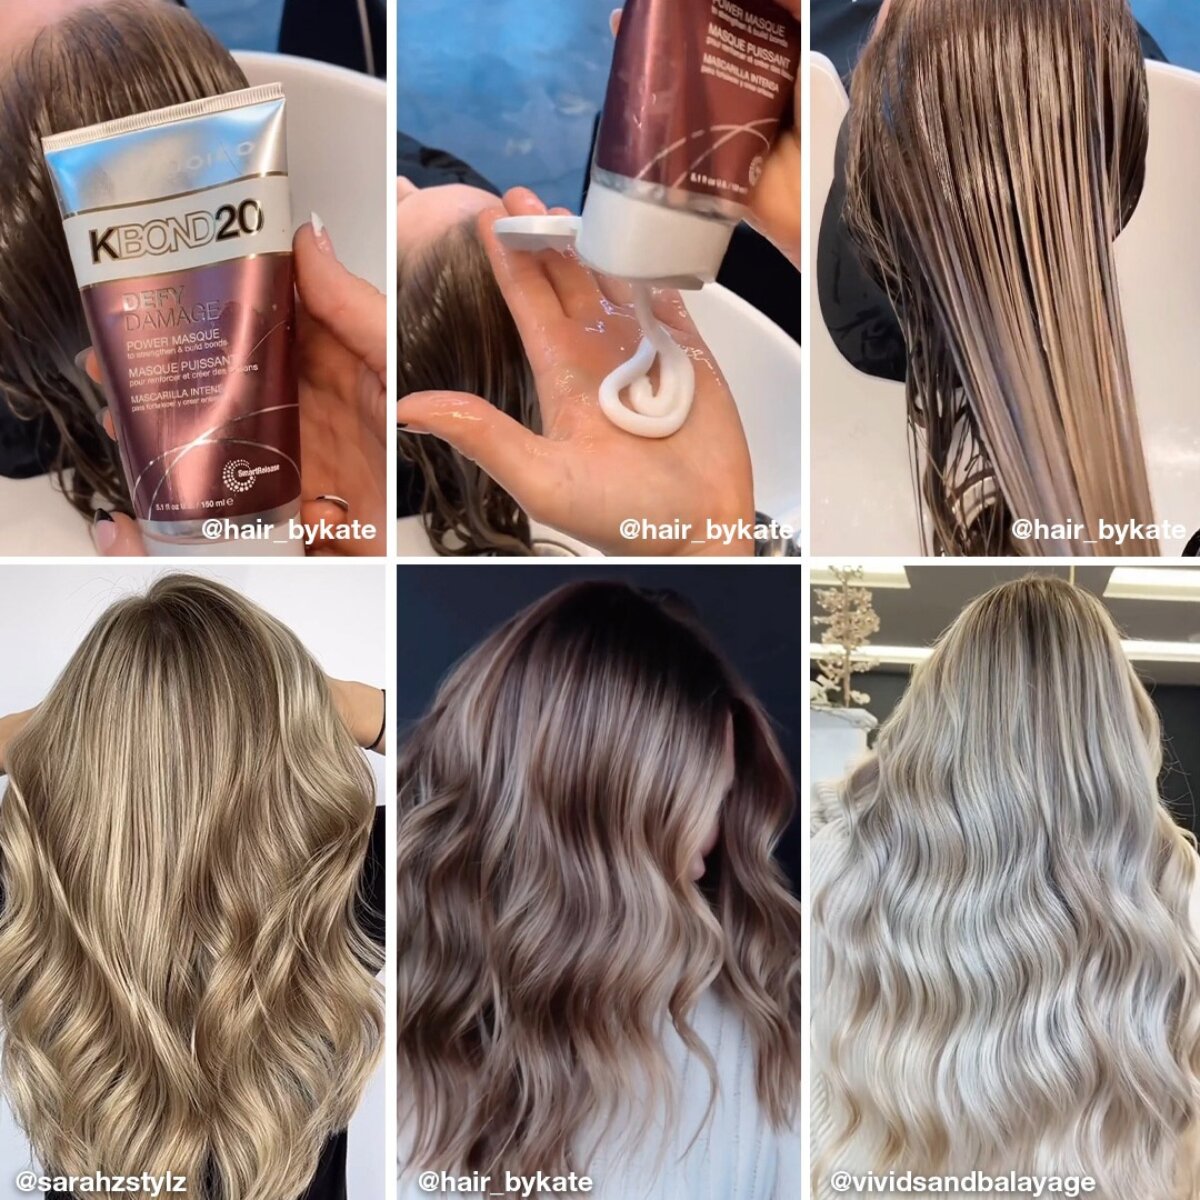 various images of kbond application and back of model's hair